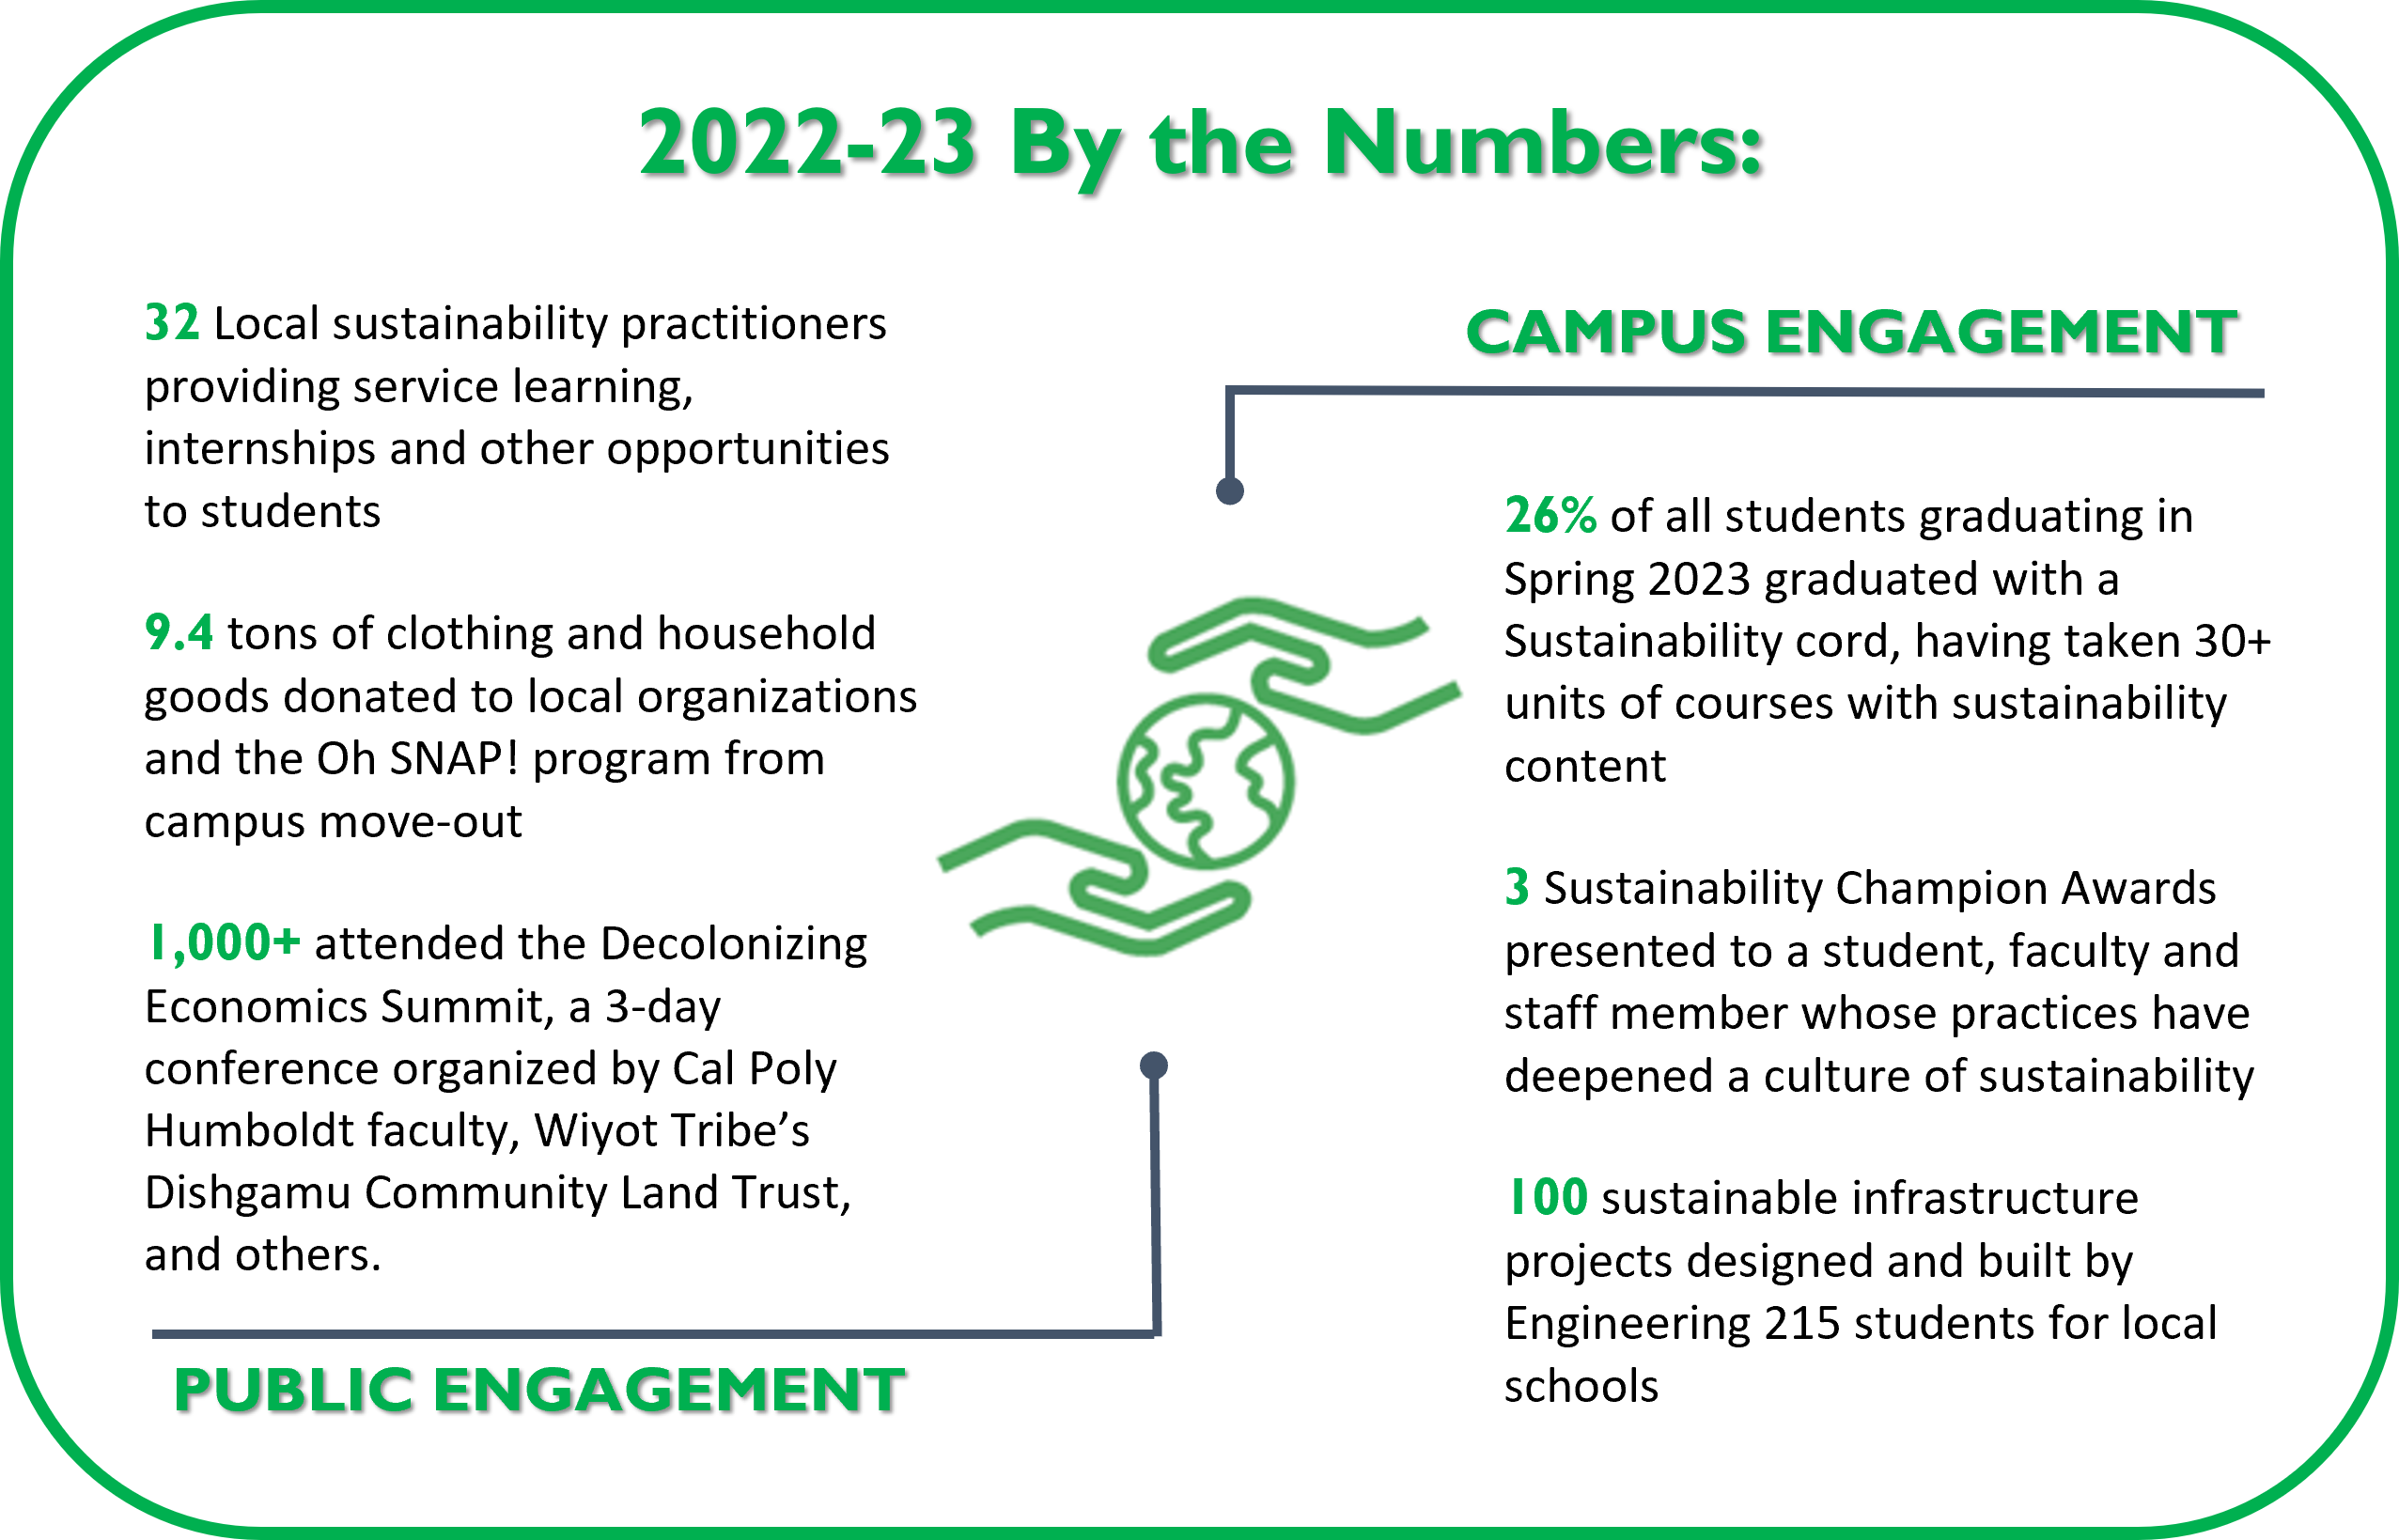 In 2022-23, 26% of all students graduated with a sustainability cord, three sustainability champions were awarded and there were over 1,000 attendees of the Decolonizing Economics Summit